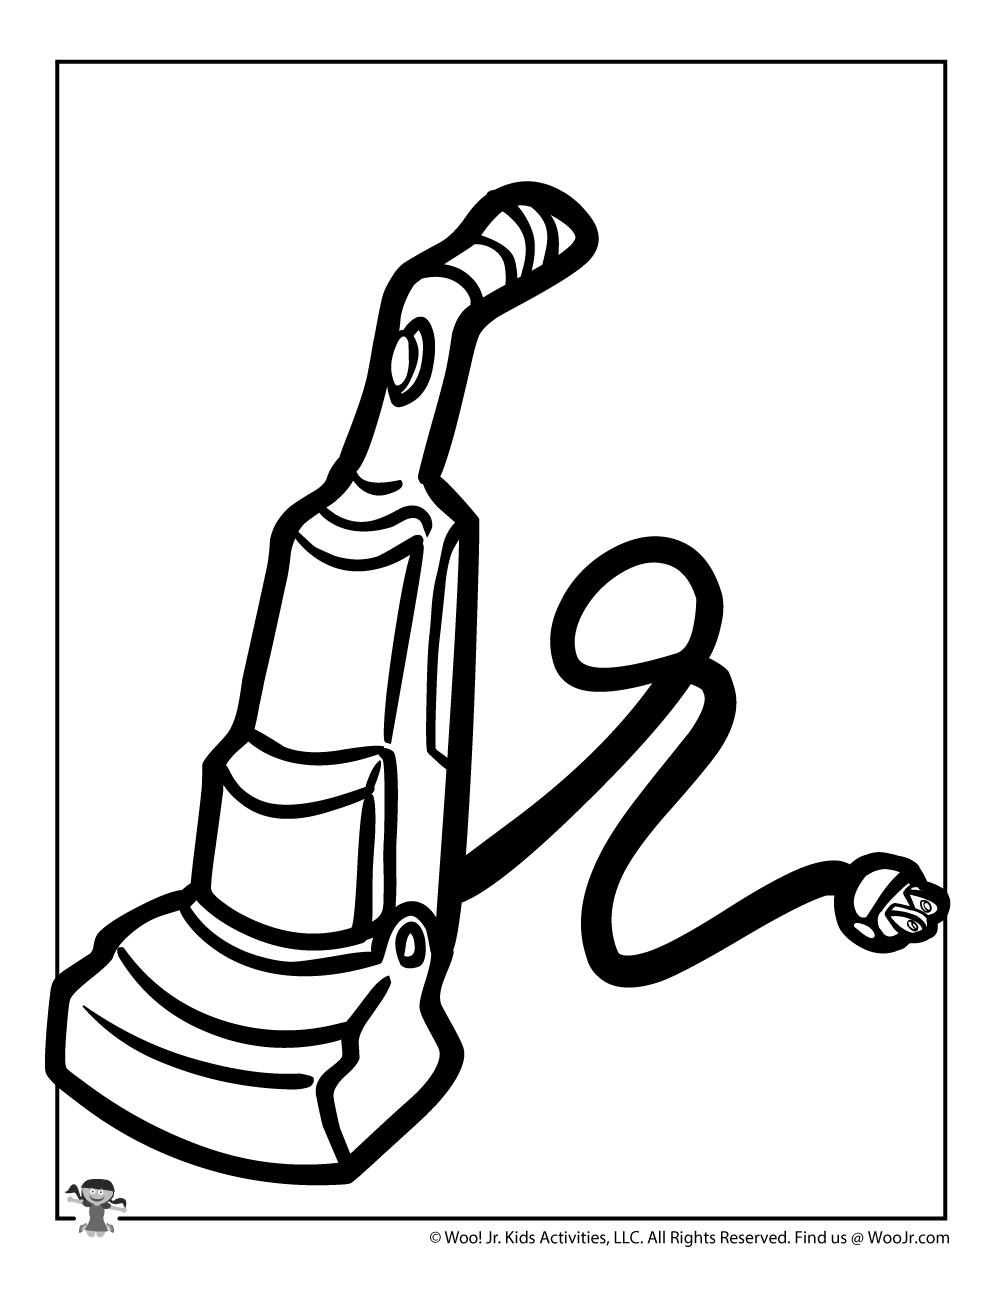 Vacuum Coloring Pages Coloring Home